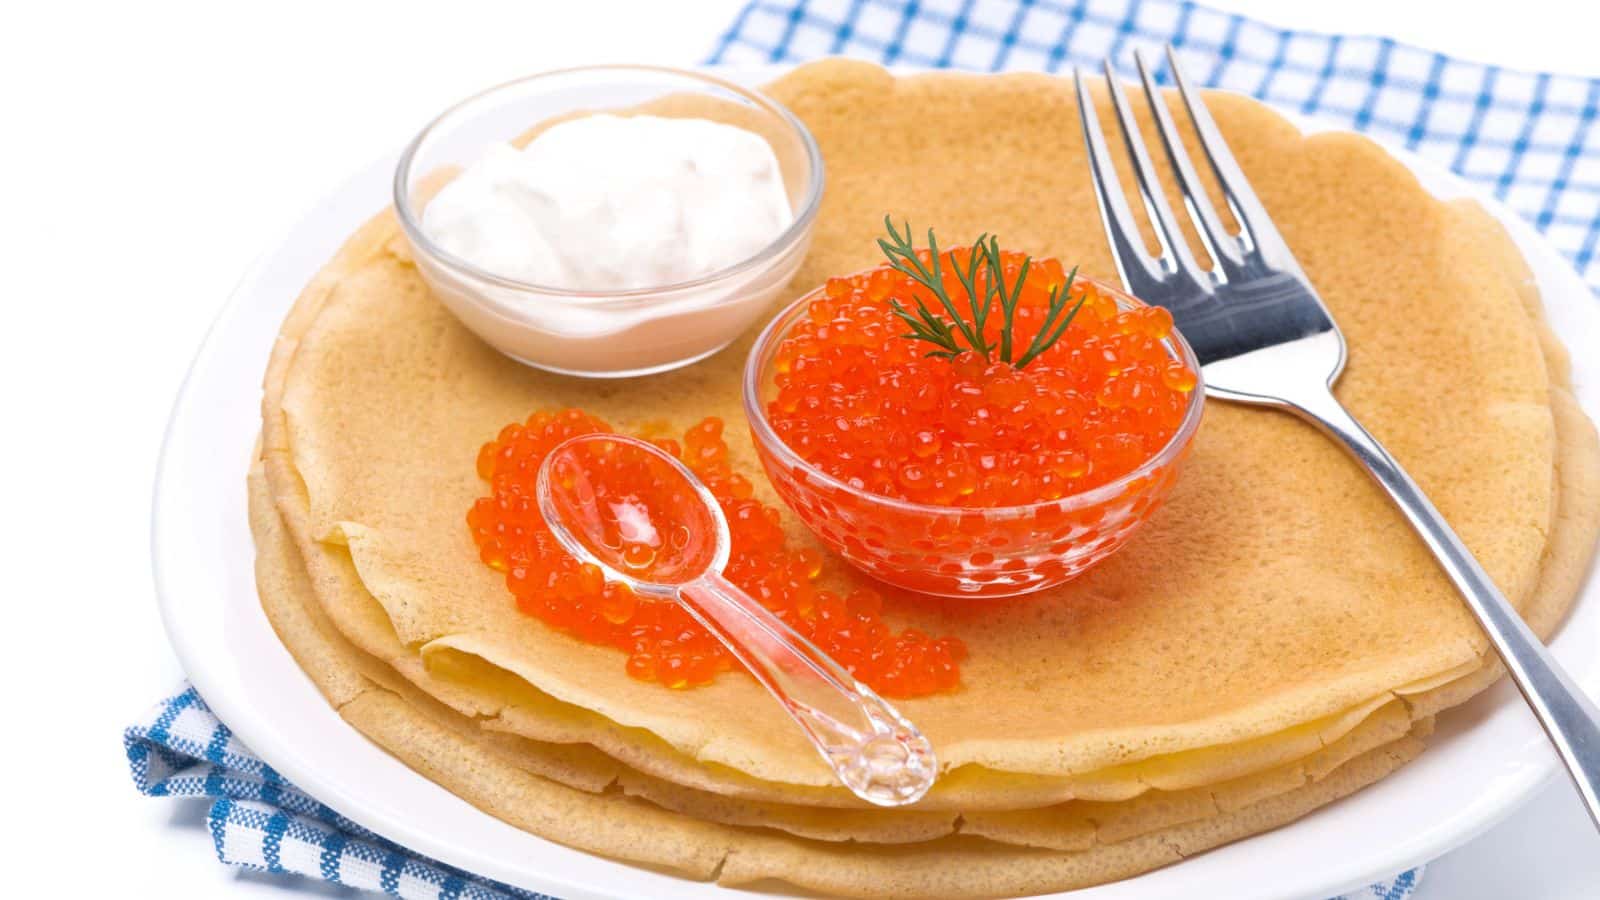 <p><span>Blini are thin and savory pancakes made from buckwheat flour. They’re often topped with various foods such as caviar, smoked salmon, or sour cream. Blini is a popular street food in Russia and is often enjoyed as a quick and tasty snack.</span></p><p><span>Blini are not merely a culinary delight; they’re a symbol of Russian culture and tradition. Each savory pancake rolled meticulously with diverse fillings mirrors Russia’s vibrant heritage and its rich food history. </span></p>